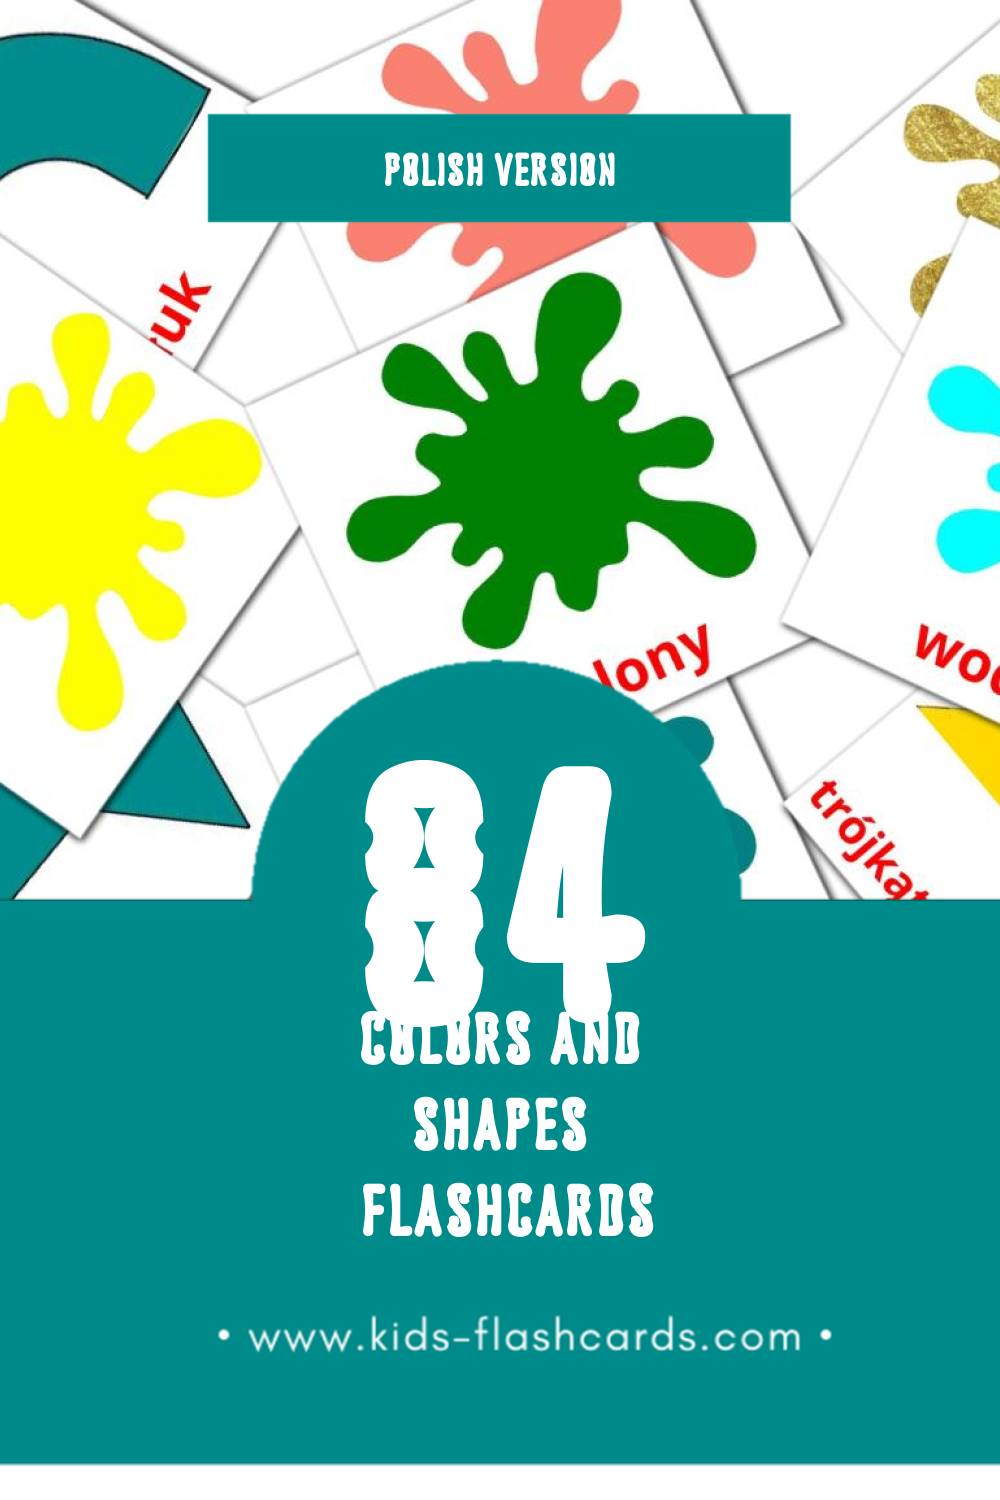 84 Free Colors and shapes Flashcards in Polish (PDF files)